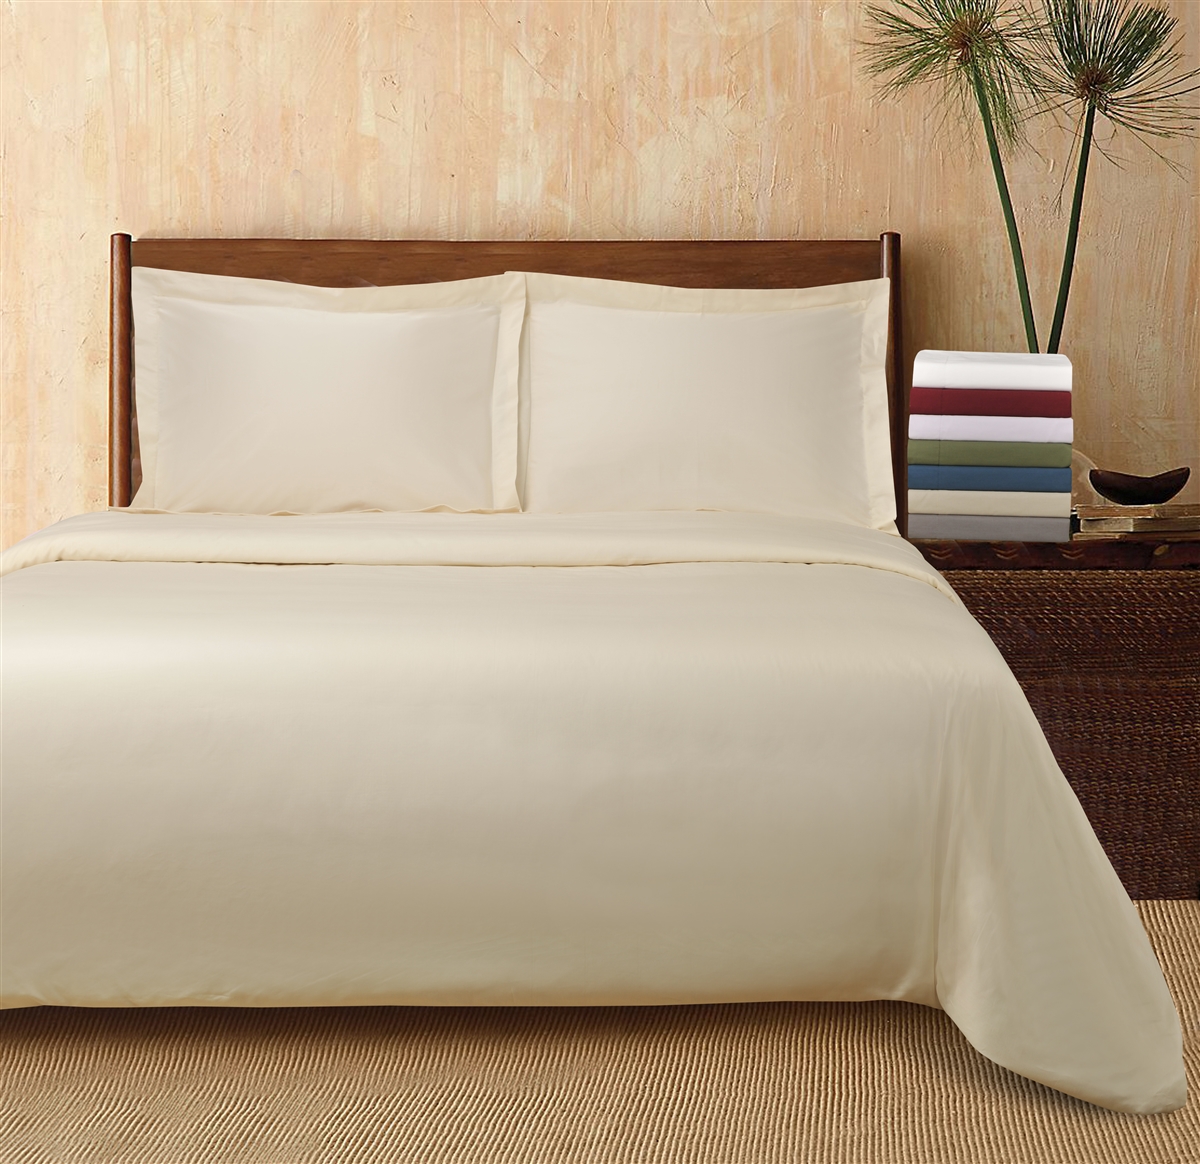 GoLinens Luxury 300 Thread Count 100% Percale Cotton Solid Duvet Cover Set with Pillowshams